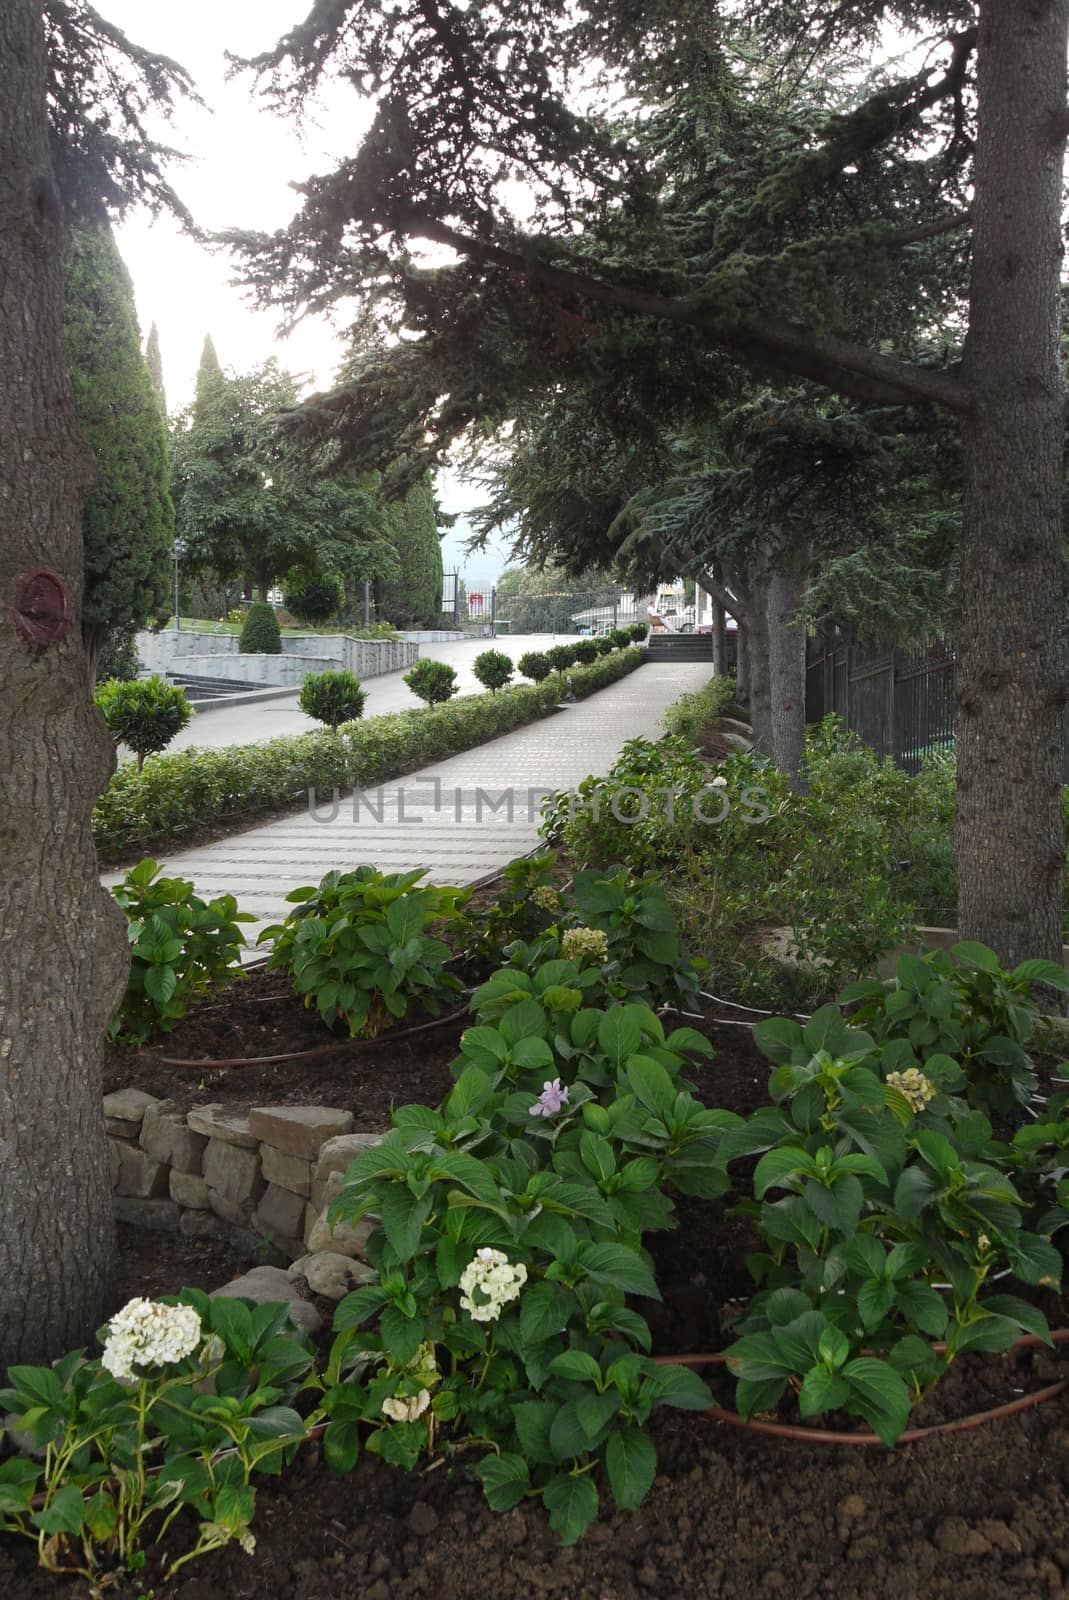 blue flowers of hydrangea in the shade of high fir trees in a city park with lanes laid out by a pavement by Adamchuk